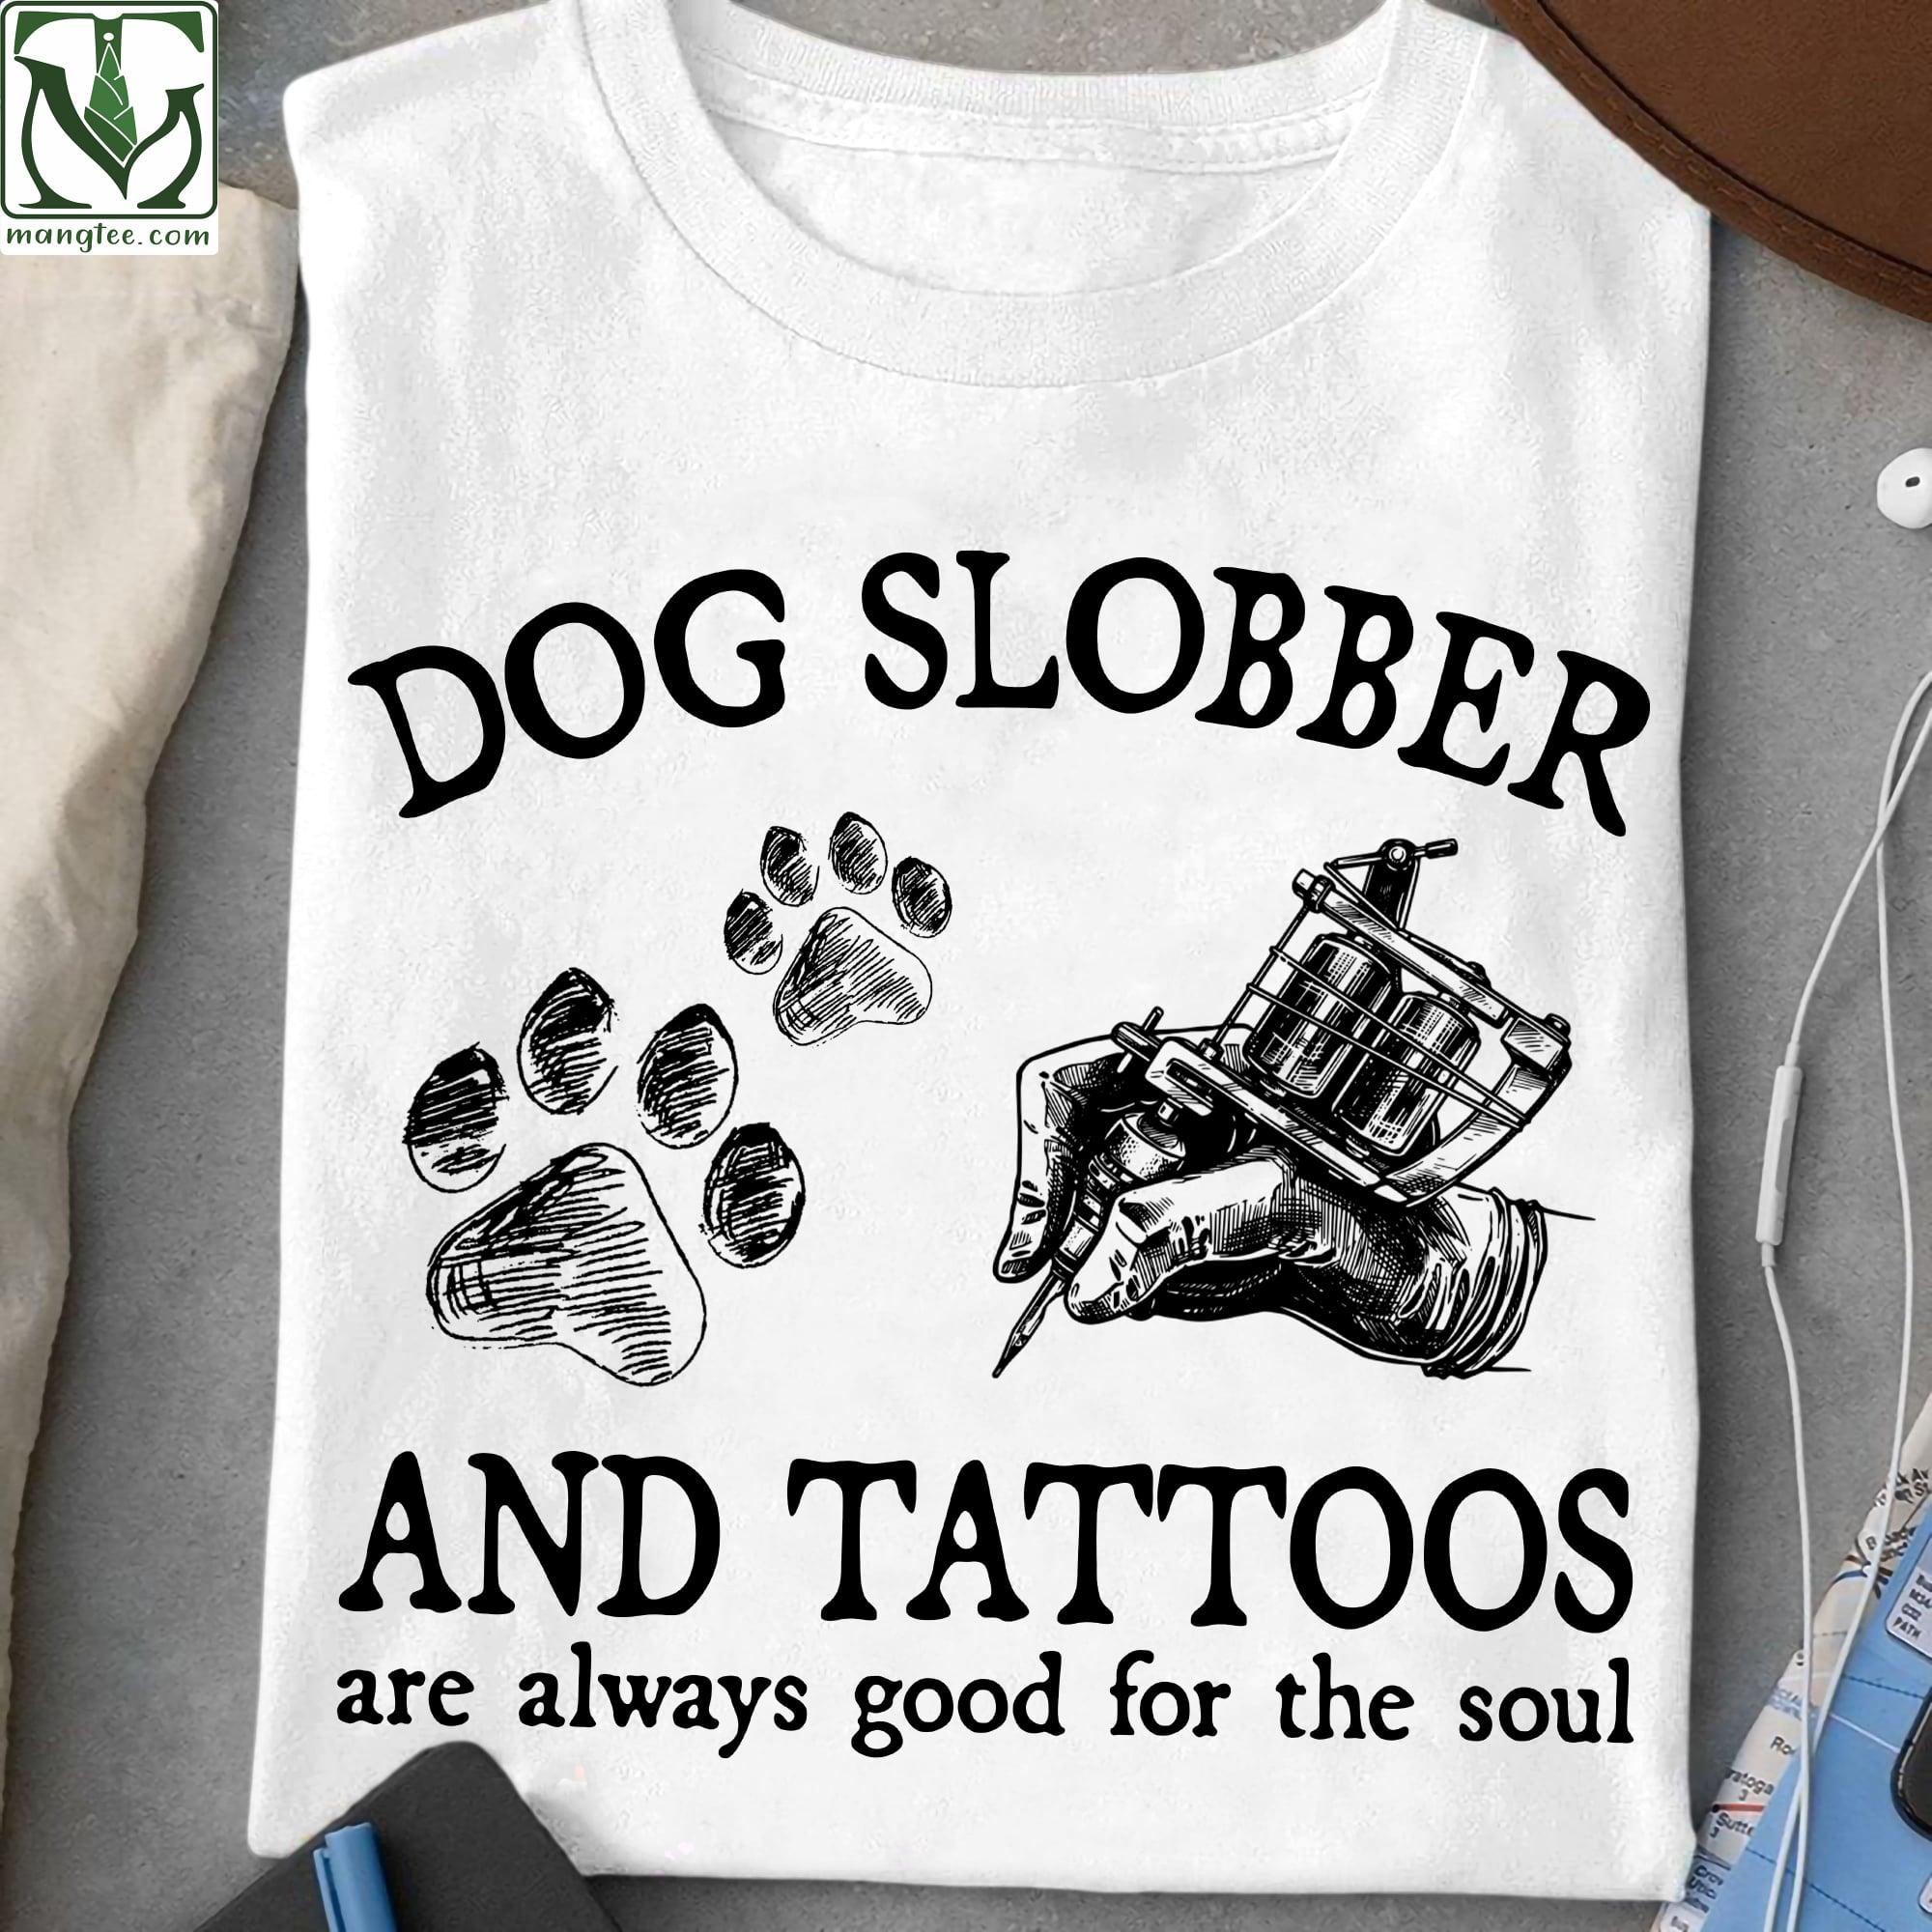 Dog slobber and tattoos are always good for the soul - Dog people soul, gift for tattooed people